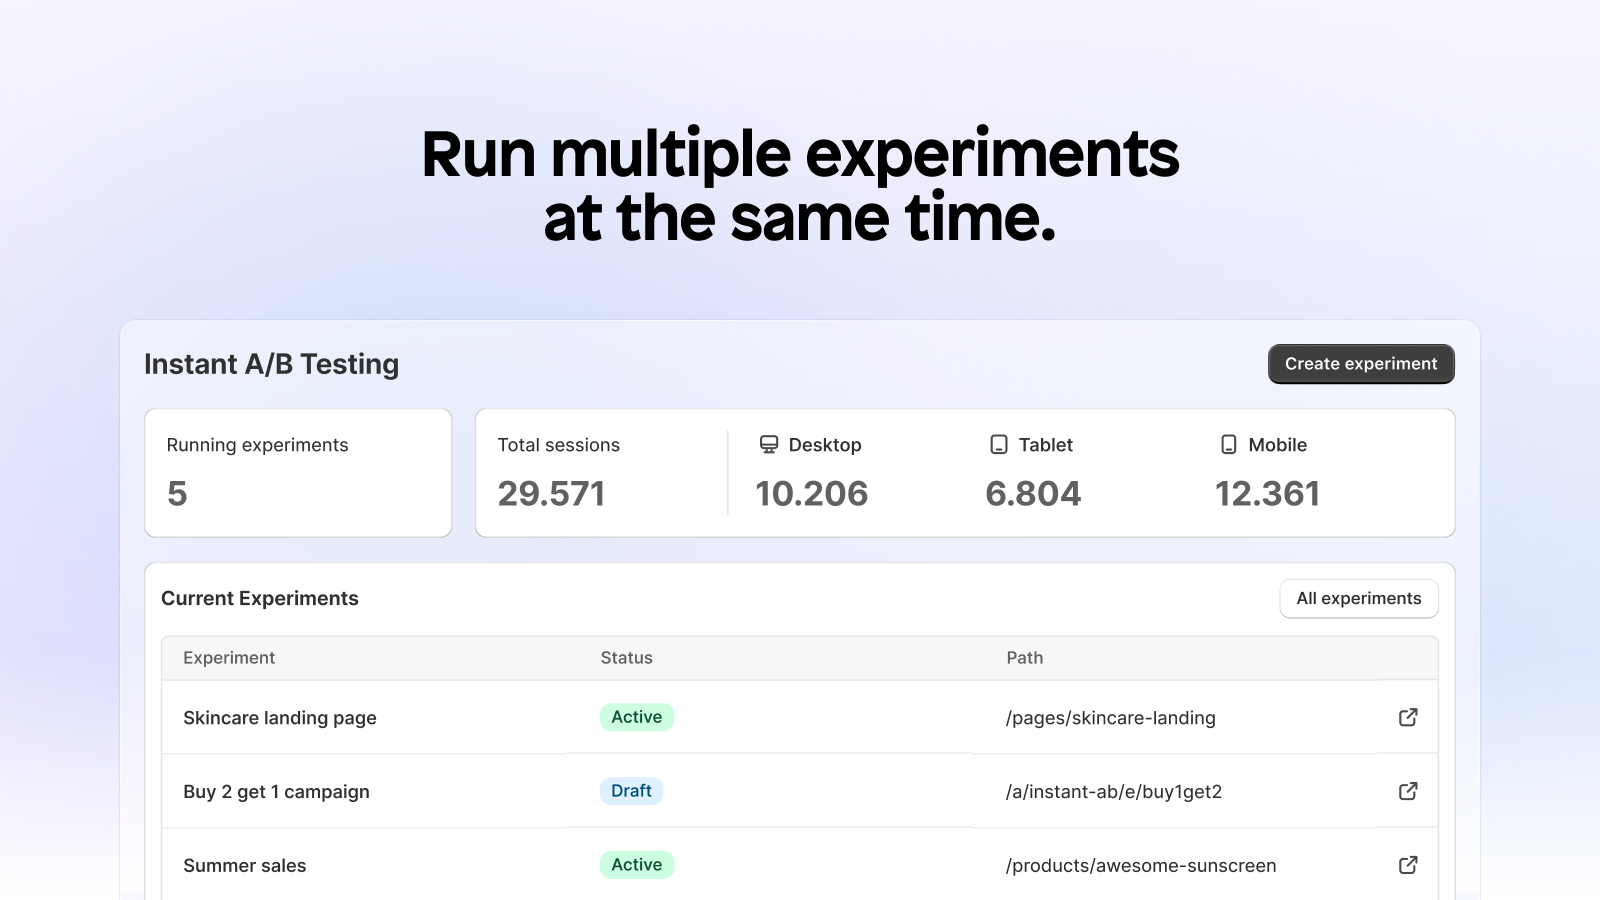 Run multiple experiments at the same time